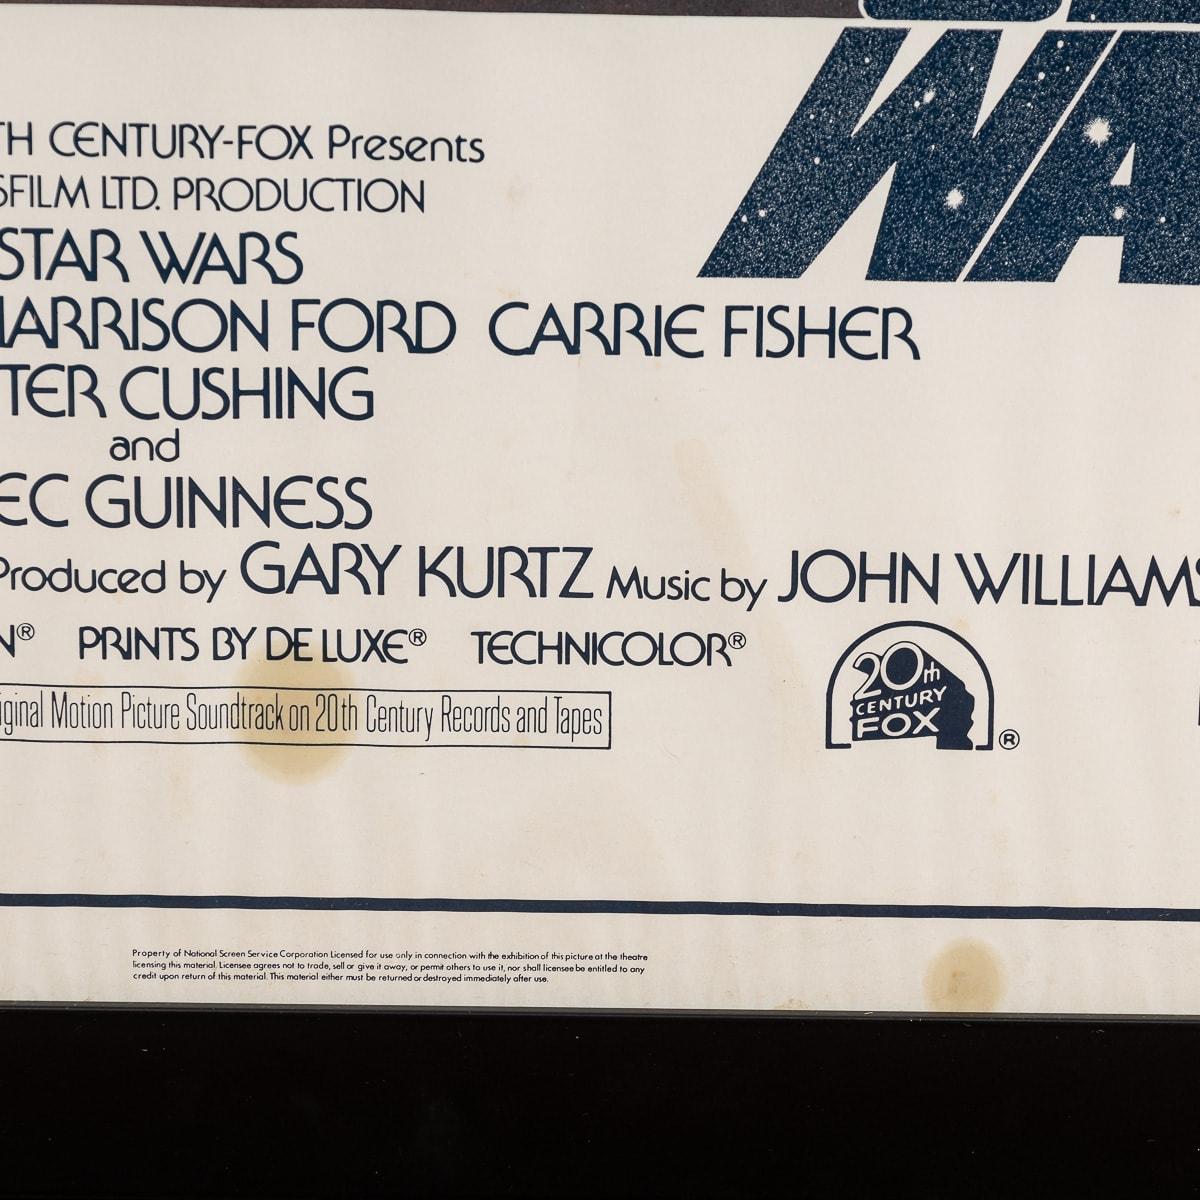 Original U.S. Release Star Wars 'A New Hope' Style A Poster 77/21 c.1977 For Sale 7